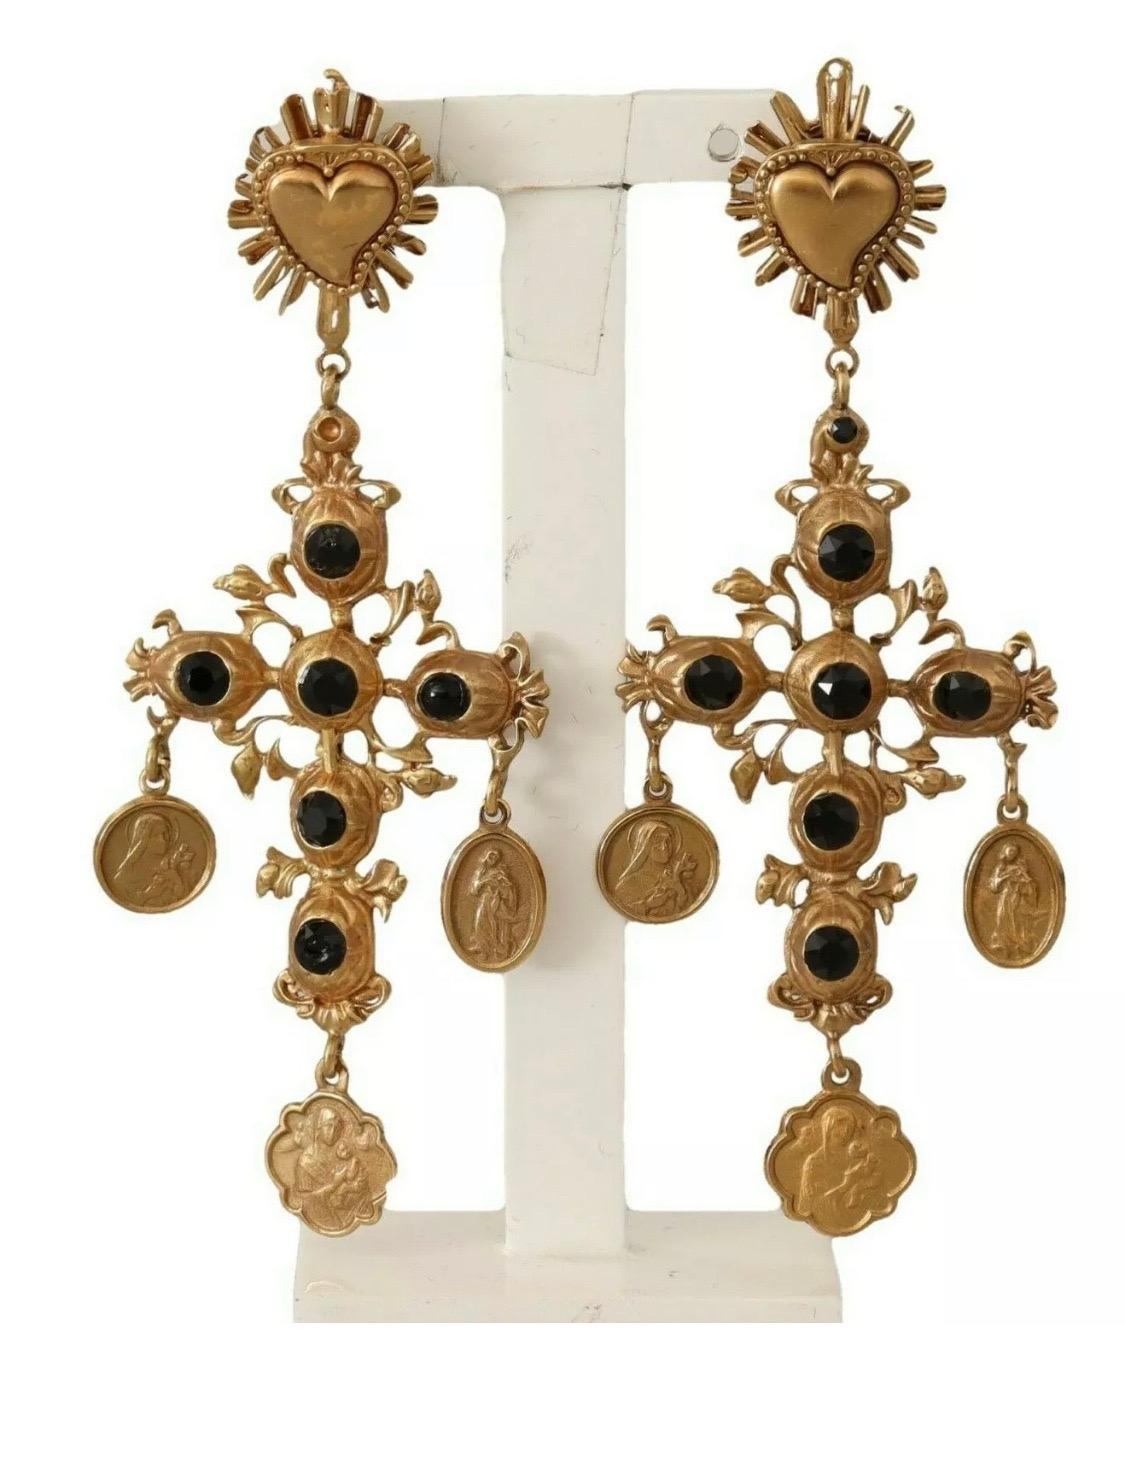 DOLCE & GABBANA

Gorgeous brand new with tags, 100% Authentic Dolce & Gabbana earrings.

Model: Clip-on, dangling
Motive: Cross
Material: 100% Brass
Color: Gold with black crystals
Logo details
Made in Italy

Length: 9.5cm

Dolce & Gabbana Box,